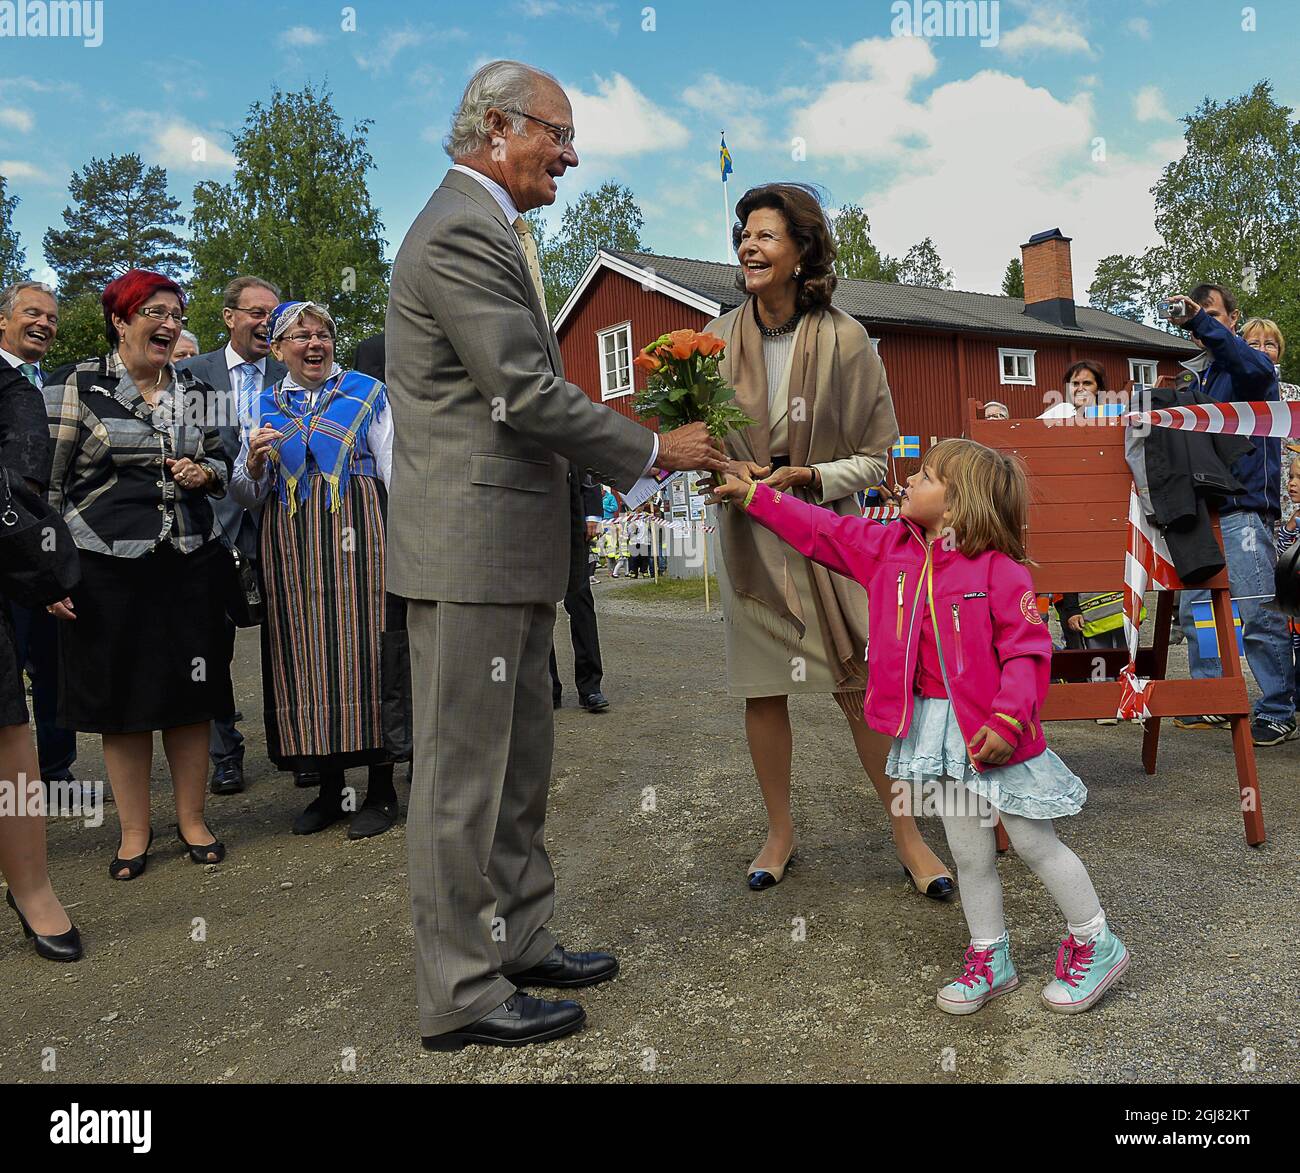 LYCKSELE 2013-08-15 King Carl Gustaf and Queen Silvia are receiving flowers from miss Frida Molin during their visit to the city of Lyckseled, north Sweden, August 15, 2013. The visit is a part of the KingÂ’s 40 year anniversary on the throne. Foto Jonas Ekstromer / SCANPIX kod 10030  Stock Photo